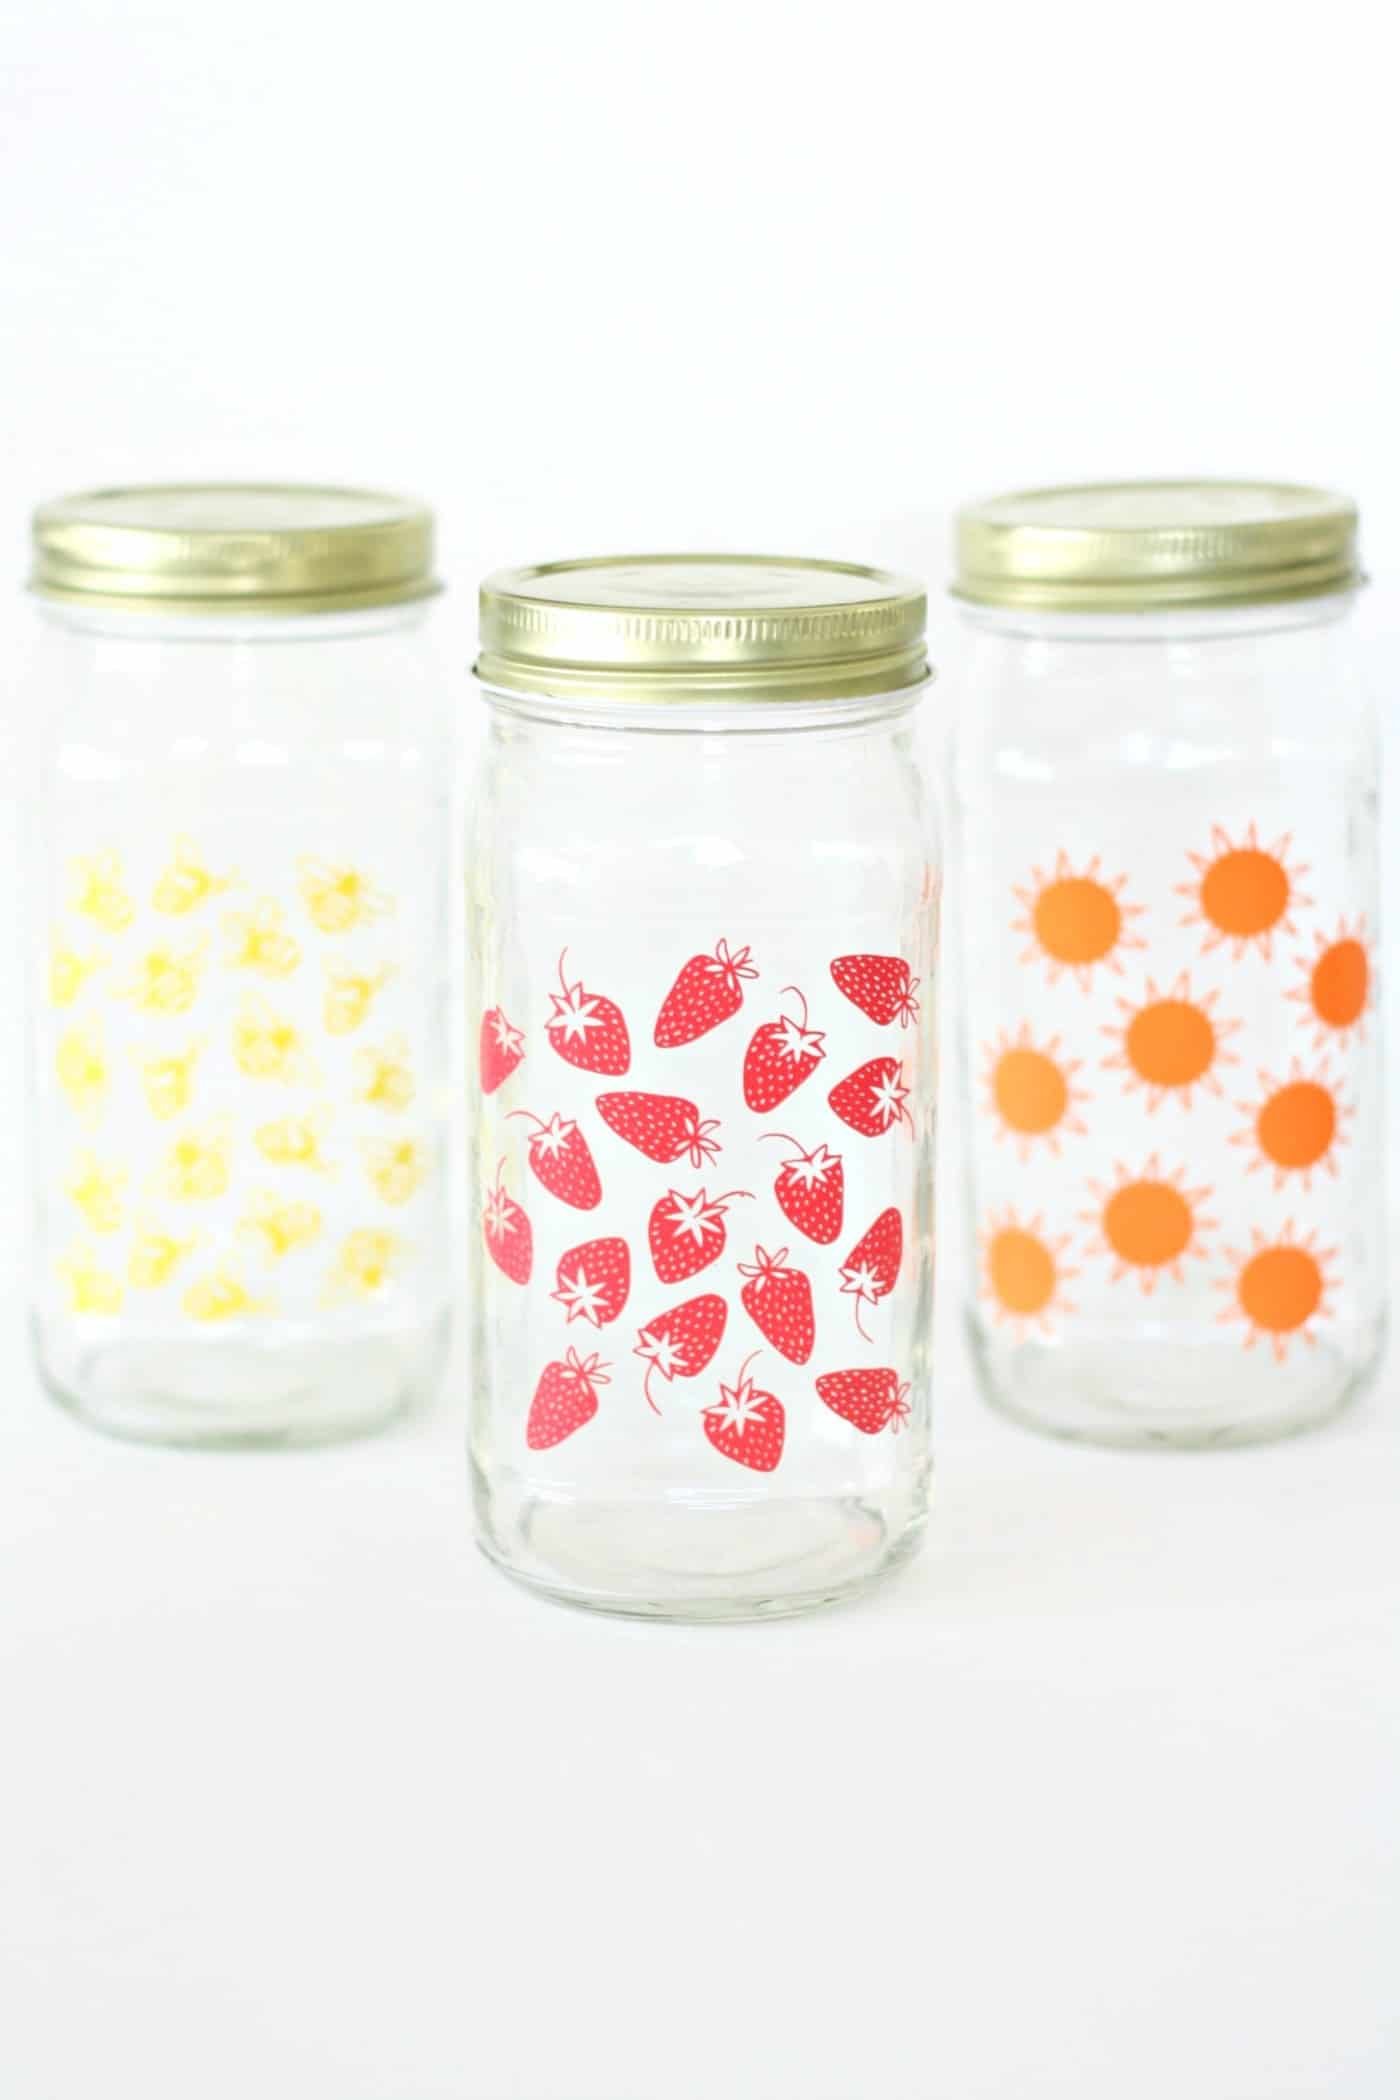 Summer Glass Jars are the perfect summer craft! You can use a glass jar for dressings or sauces, and decorating these jars with some seasonal designs makes them so cute to take to a party or picnic. They would also make a darling gift as a set! 